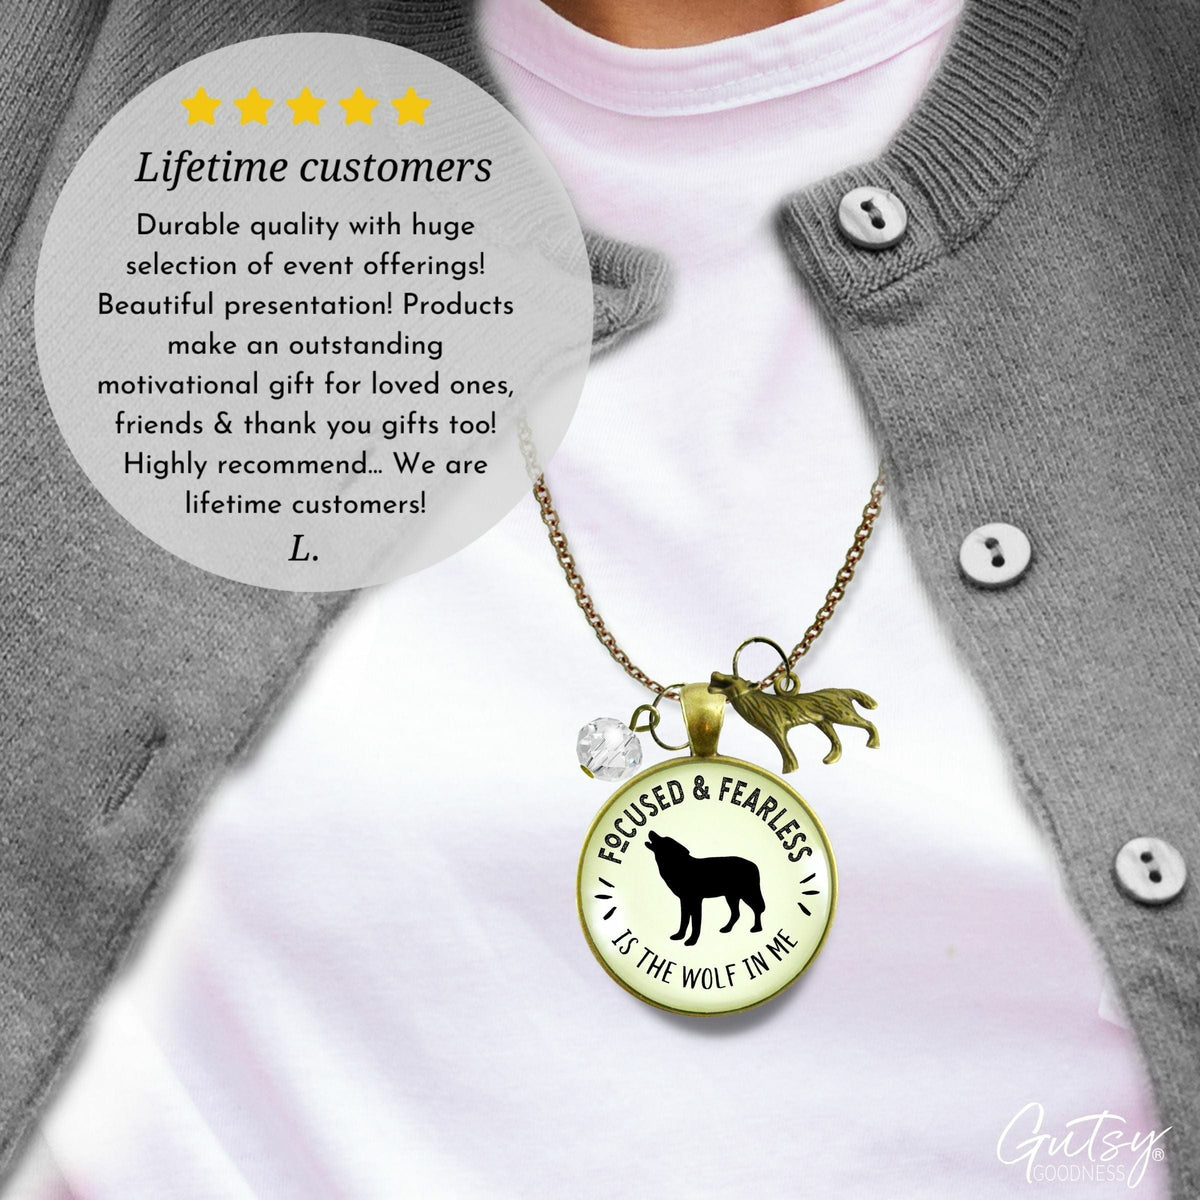 Gutsy Goodness Wolf Necklace Focused Fearless Vintage Jewelry Howling Spirit Animal - Gutsy Goodness Handmade Jewelry;Wolf Necklace Focused Fearless Vintage Jewelry Howling Spirit Animal - Gutsy Goodness Handmade Jewelry Gifts